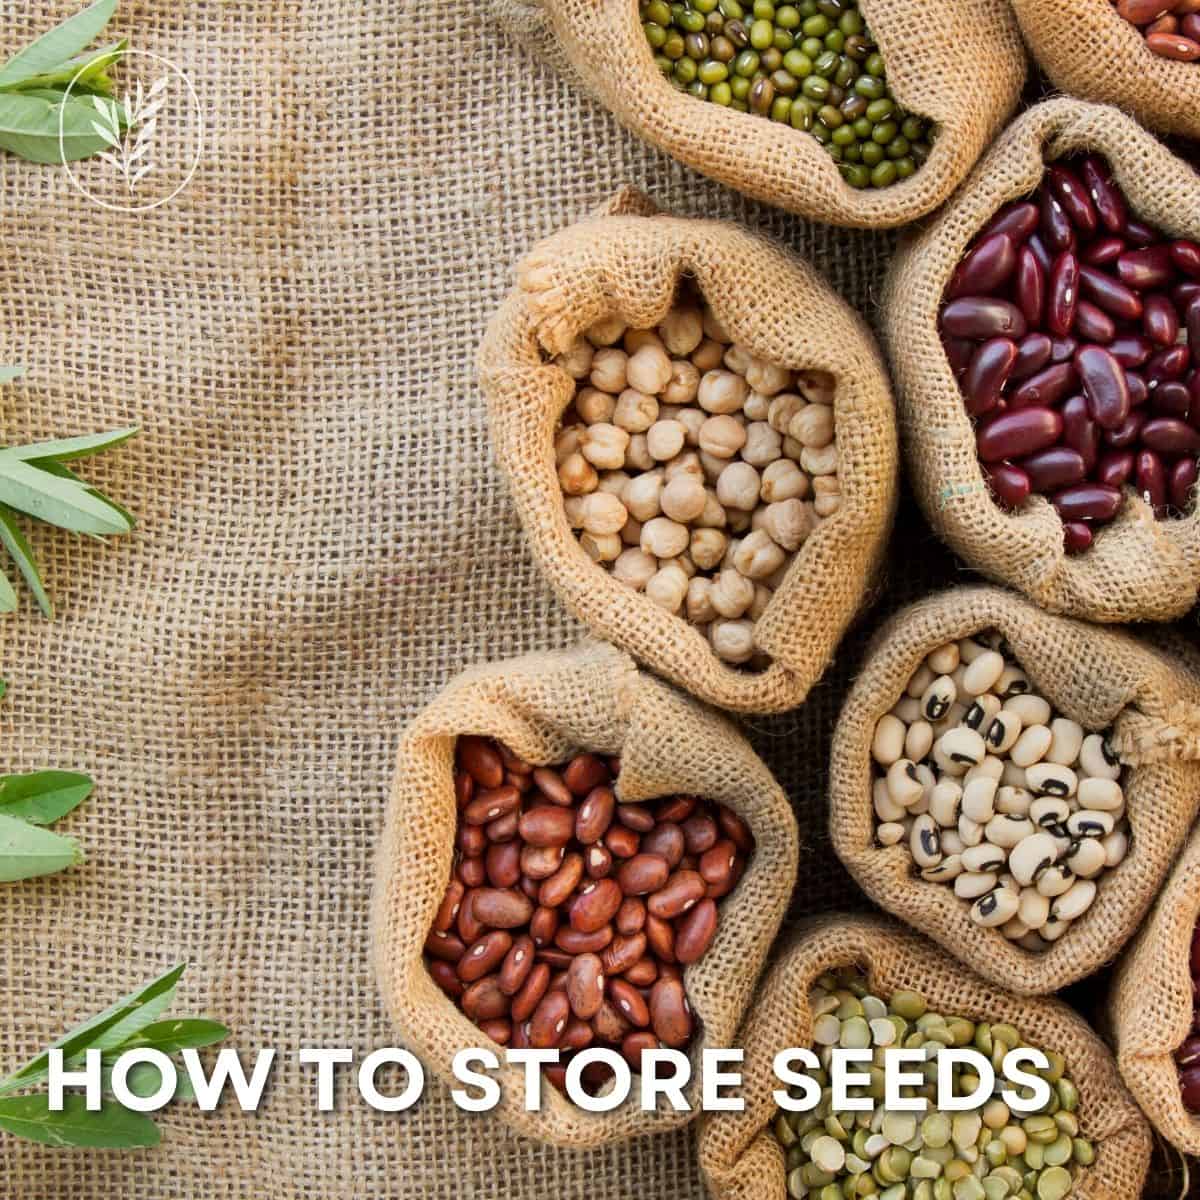 Wondering how to store seeds? Whether it's for next season or years down the road, store your seeds properly and they'll stay viable longer. Via @home4theharvest